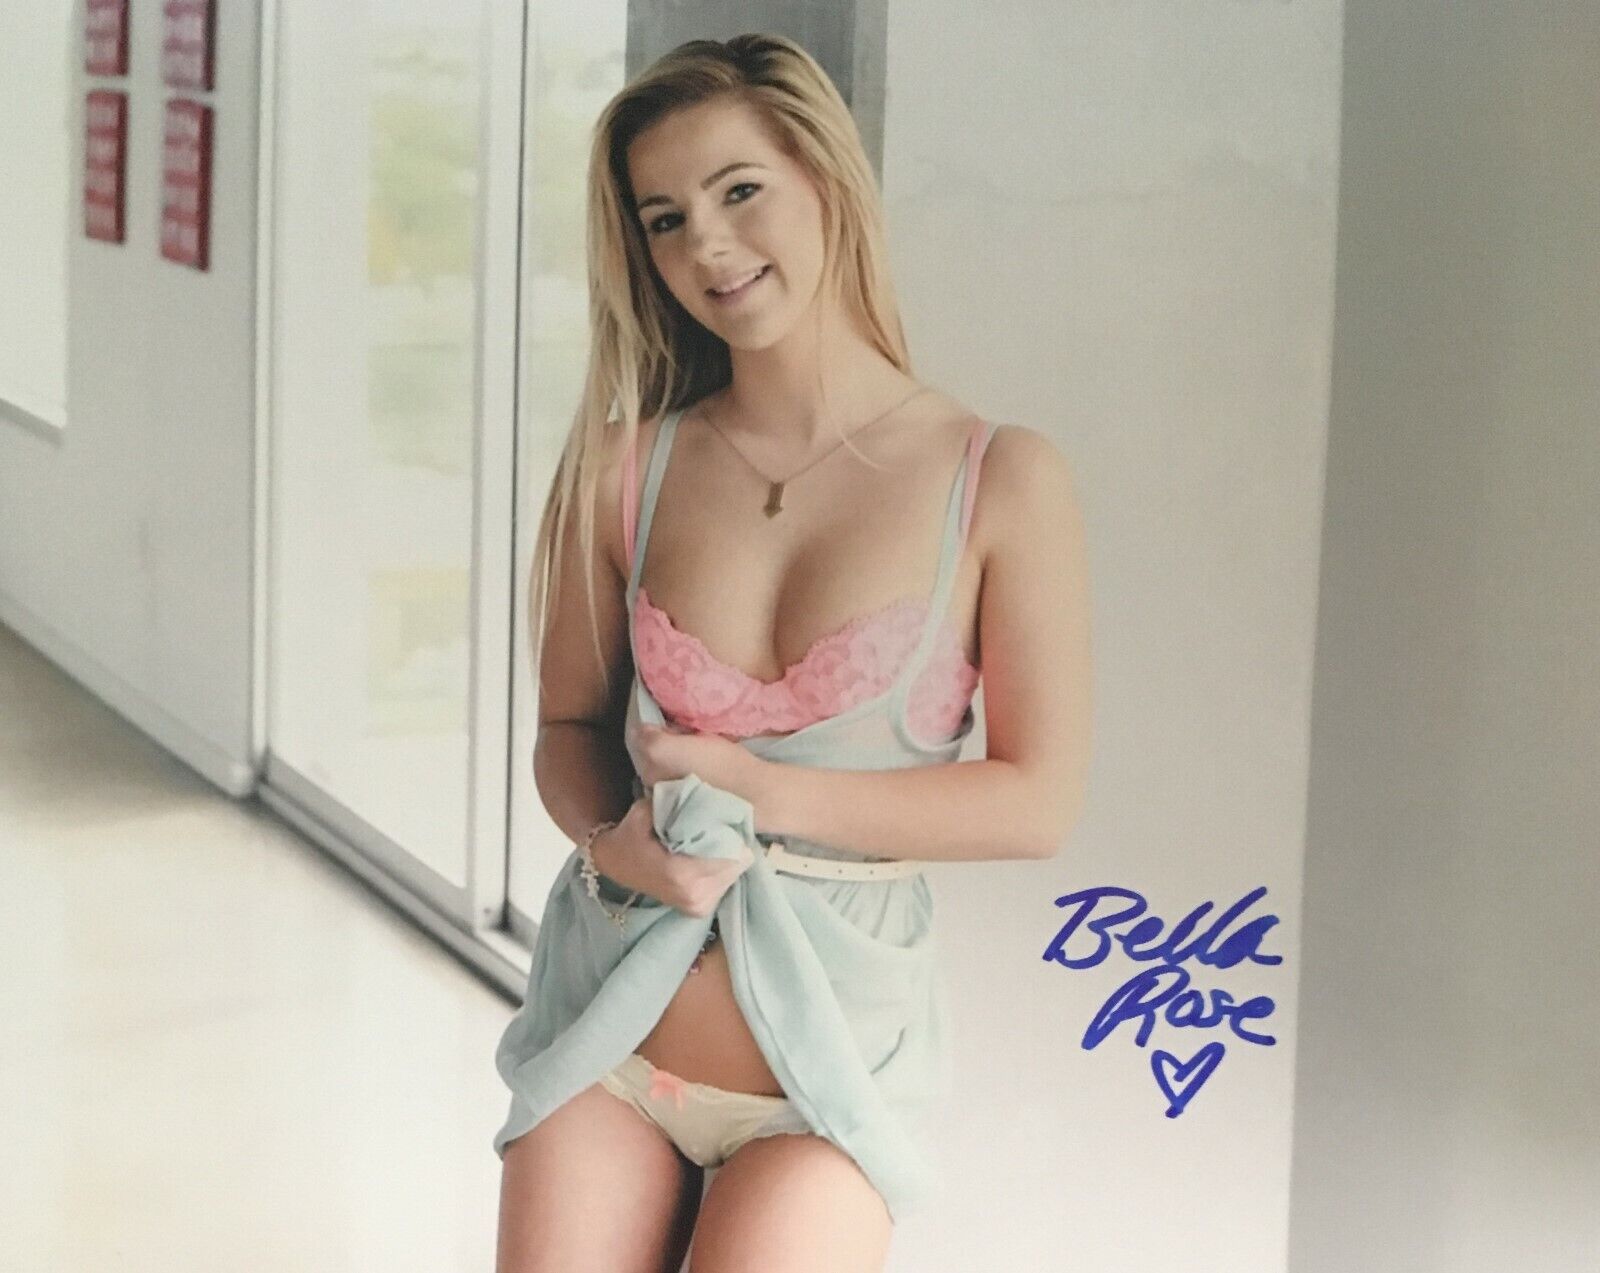 Bella Rose In Her Bra & Panties Signed 8x10 Photo Poster painting Adult Model COA E2